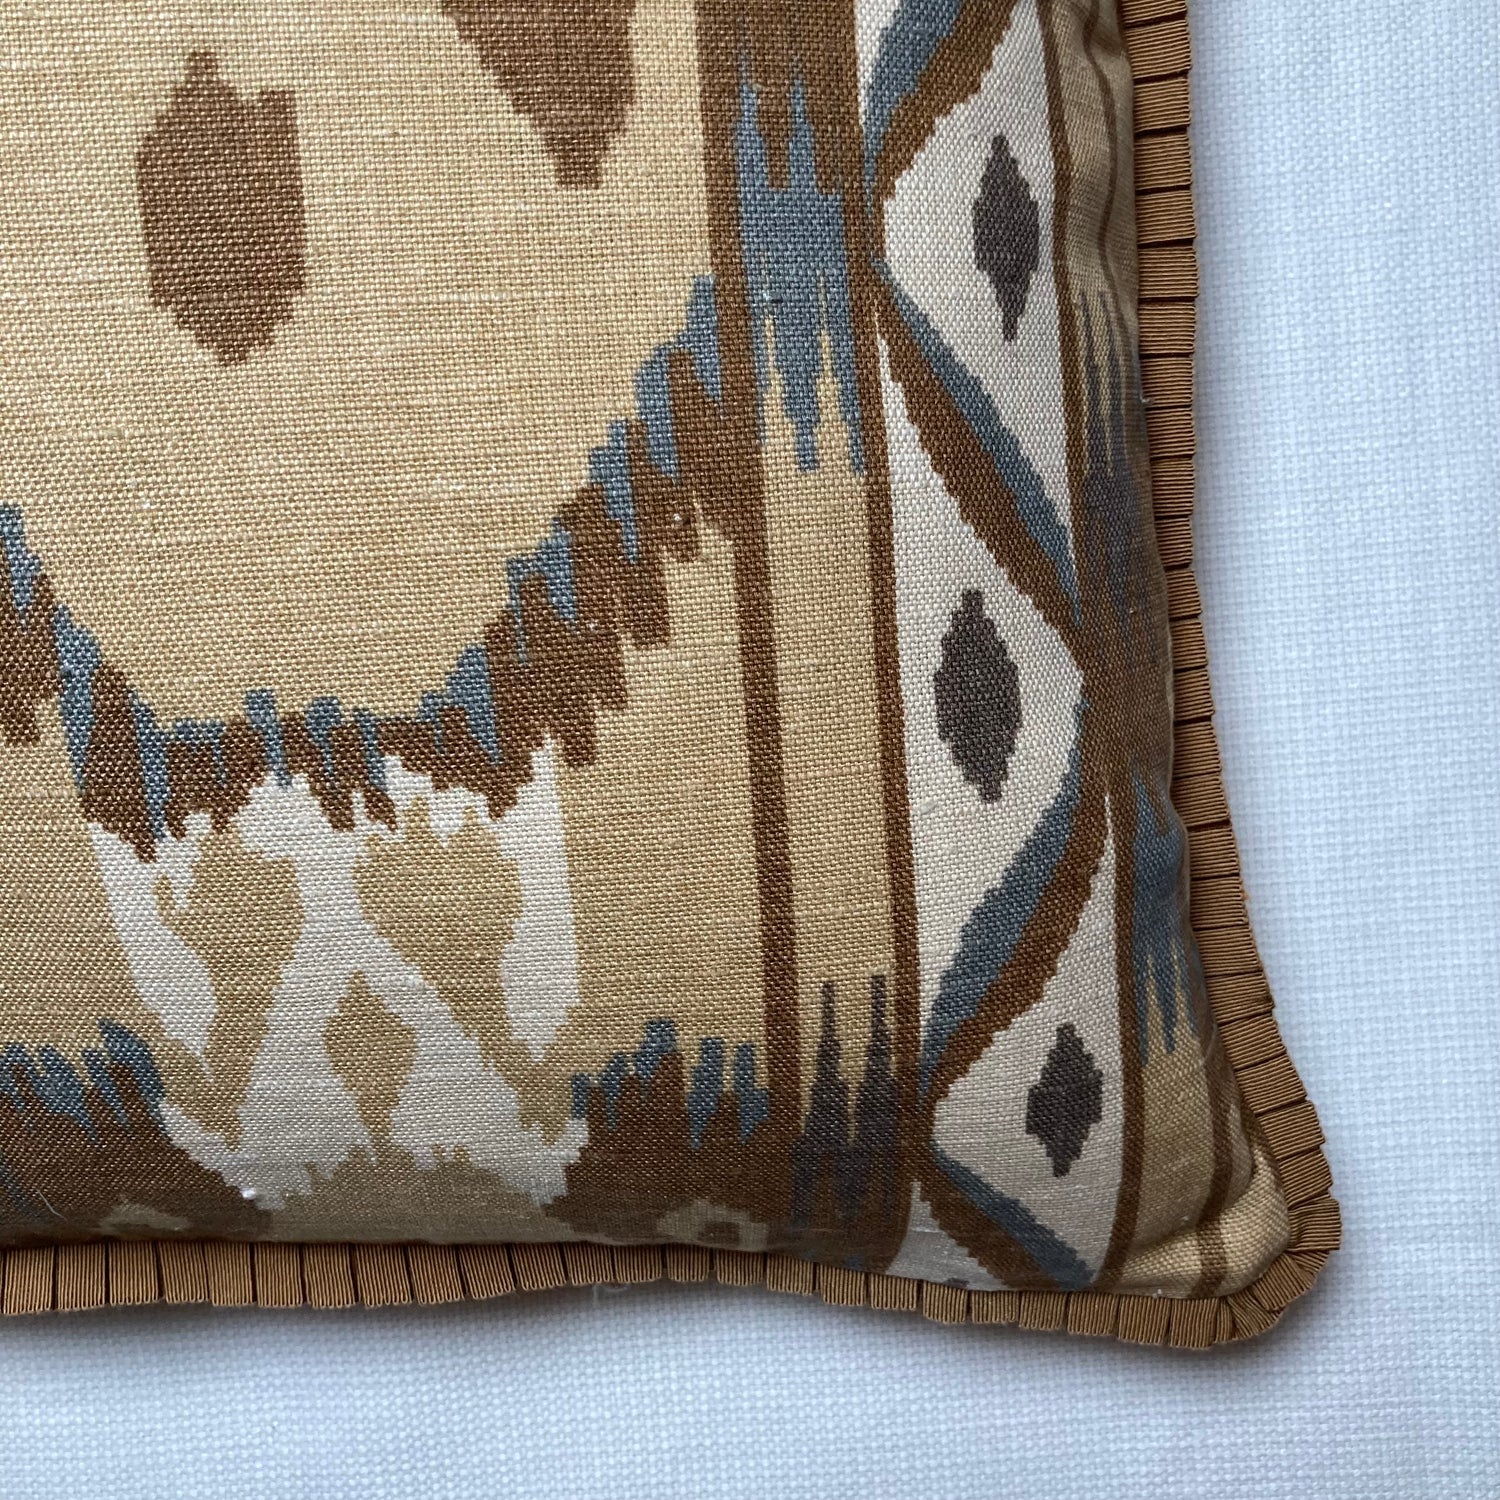 Middle Eastern Tribal Motif 21 x 21 Square Designer Pillow Detail with Down Feather Insert